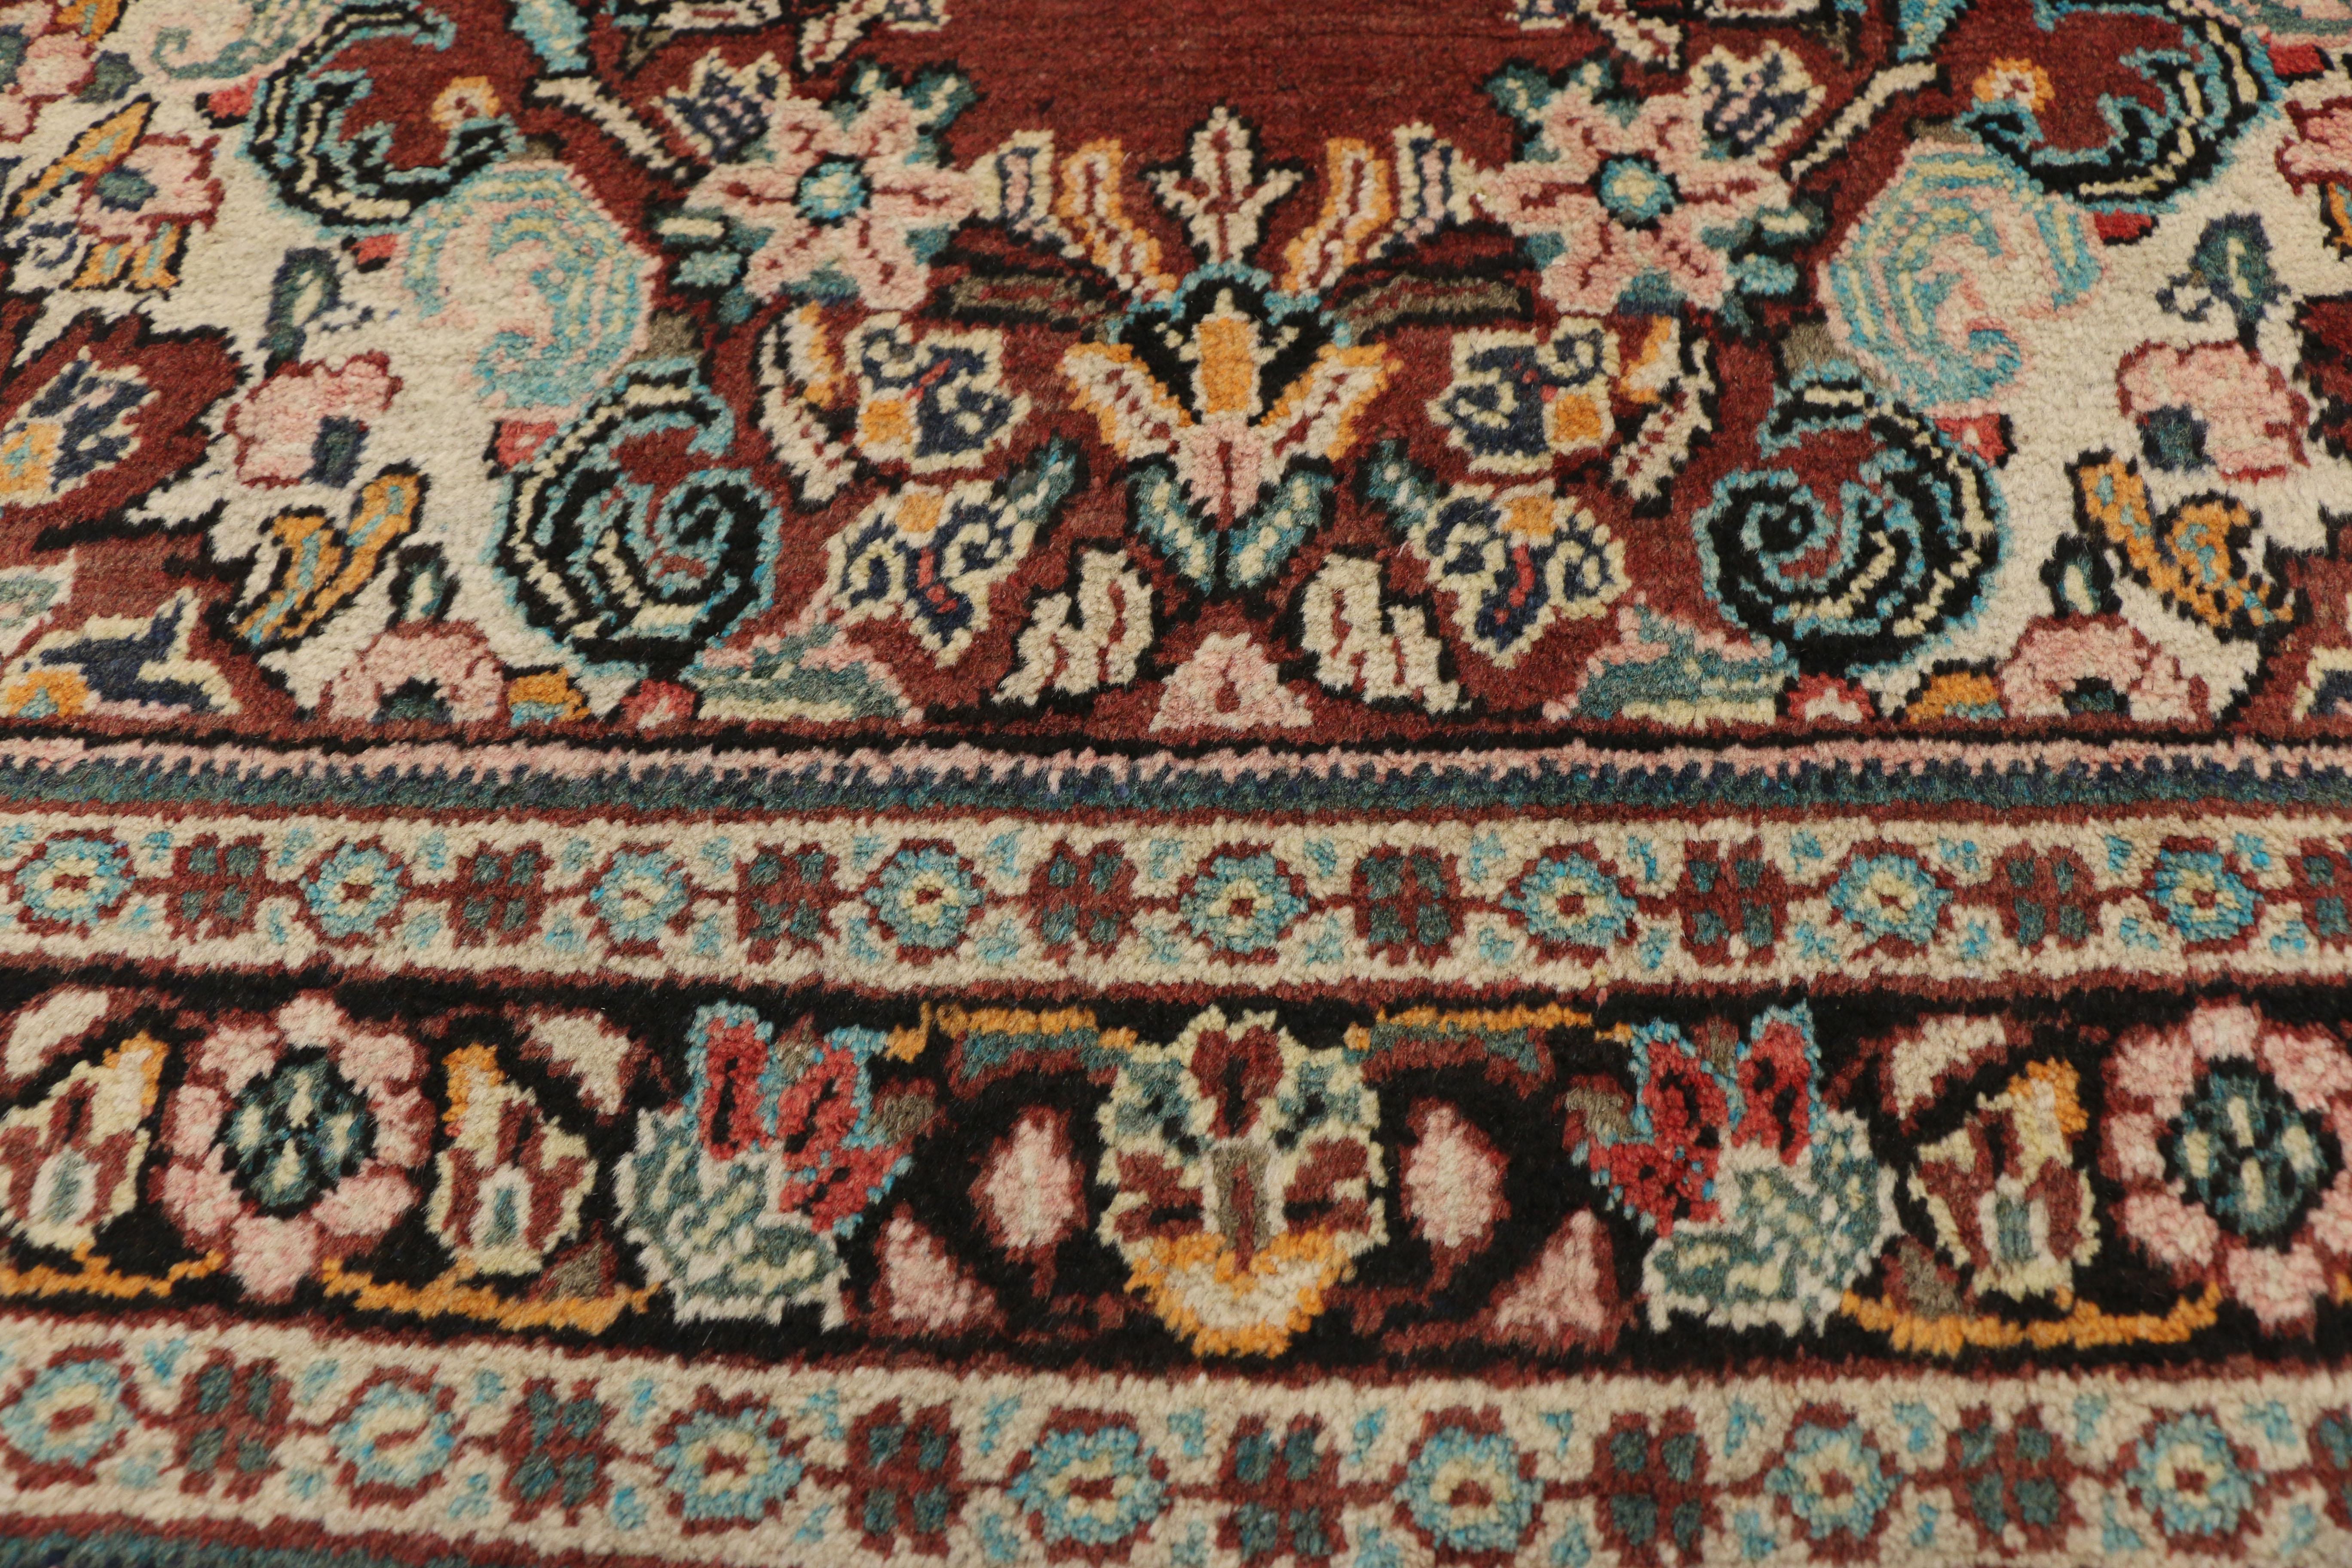 Vintage Persian Mahal Rug with Rustic English Country Style In Good Condition For Sale In Dallas, TX